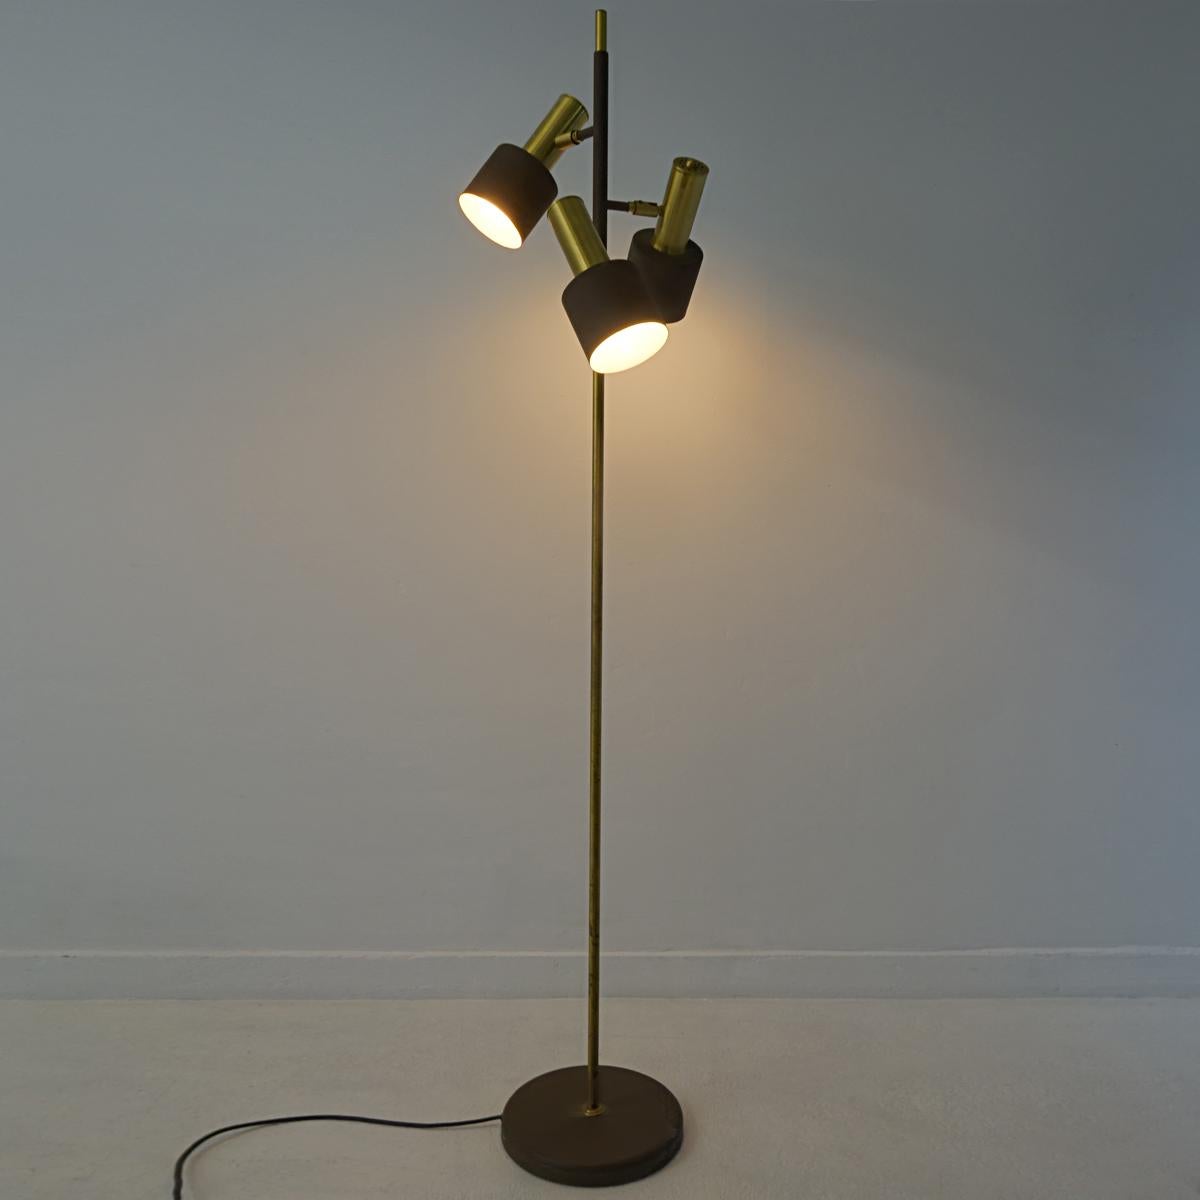 Mid-Century Modern Adjustable Floor Lamp in Brass and Brown by RAAK Amsterdam For Sale 2